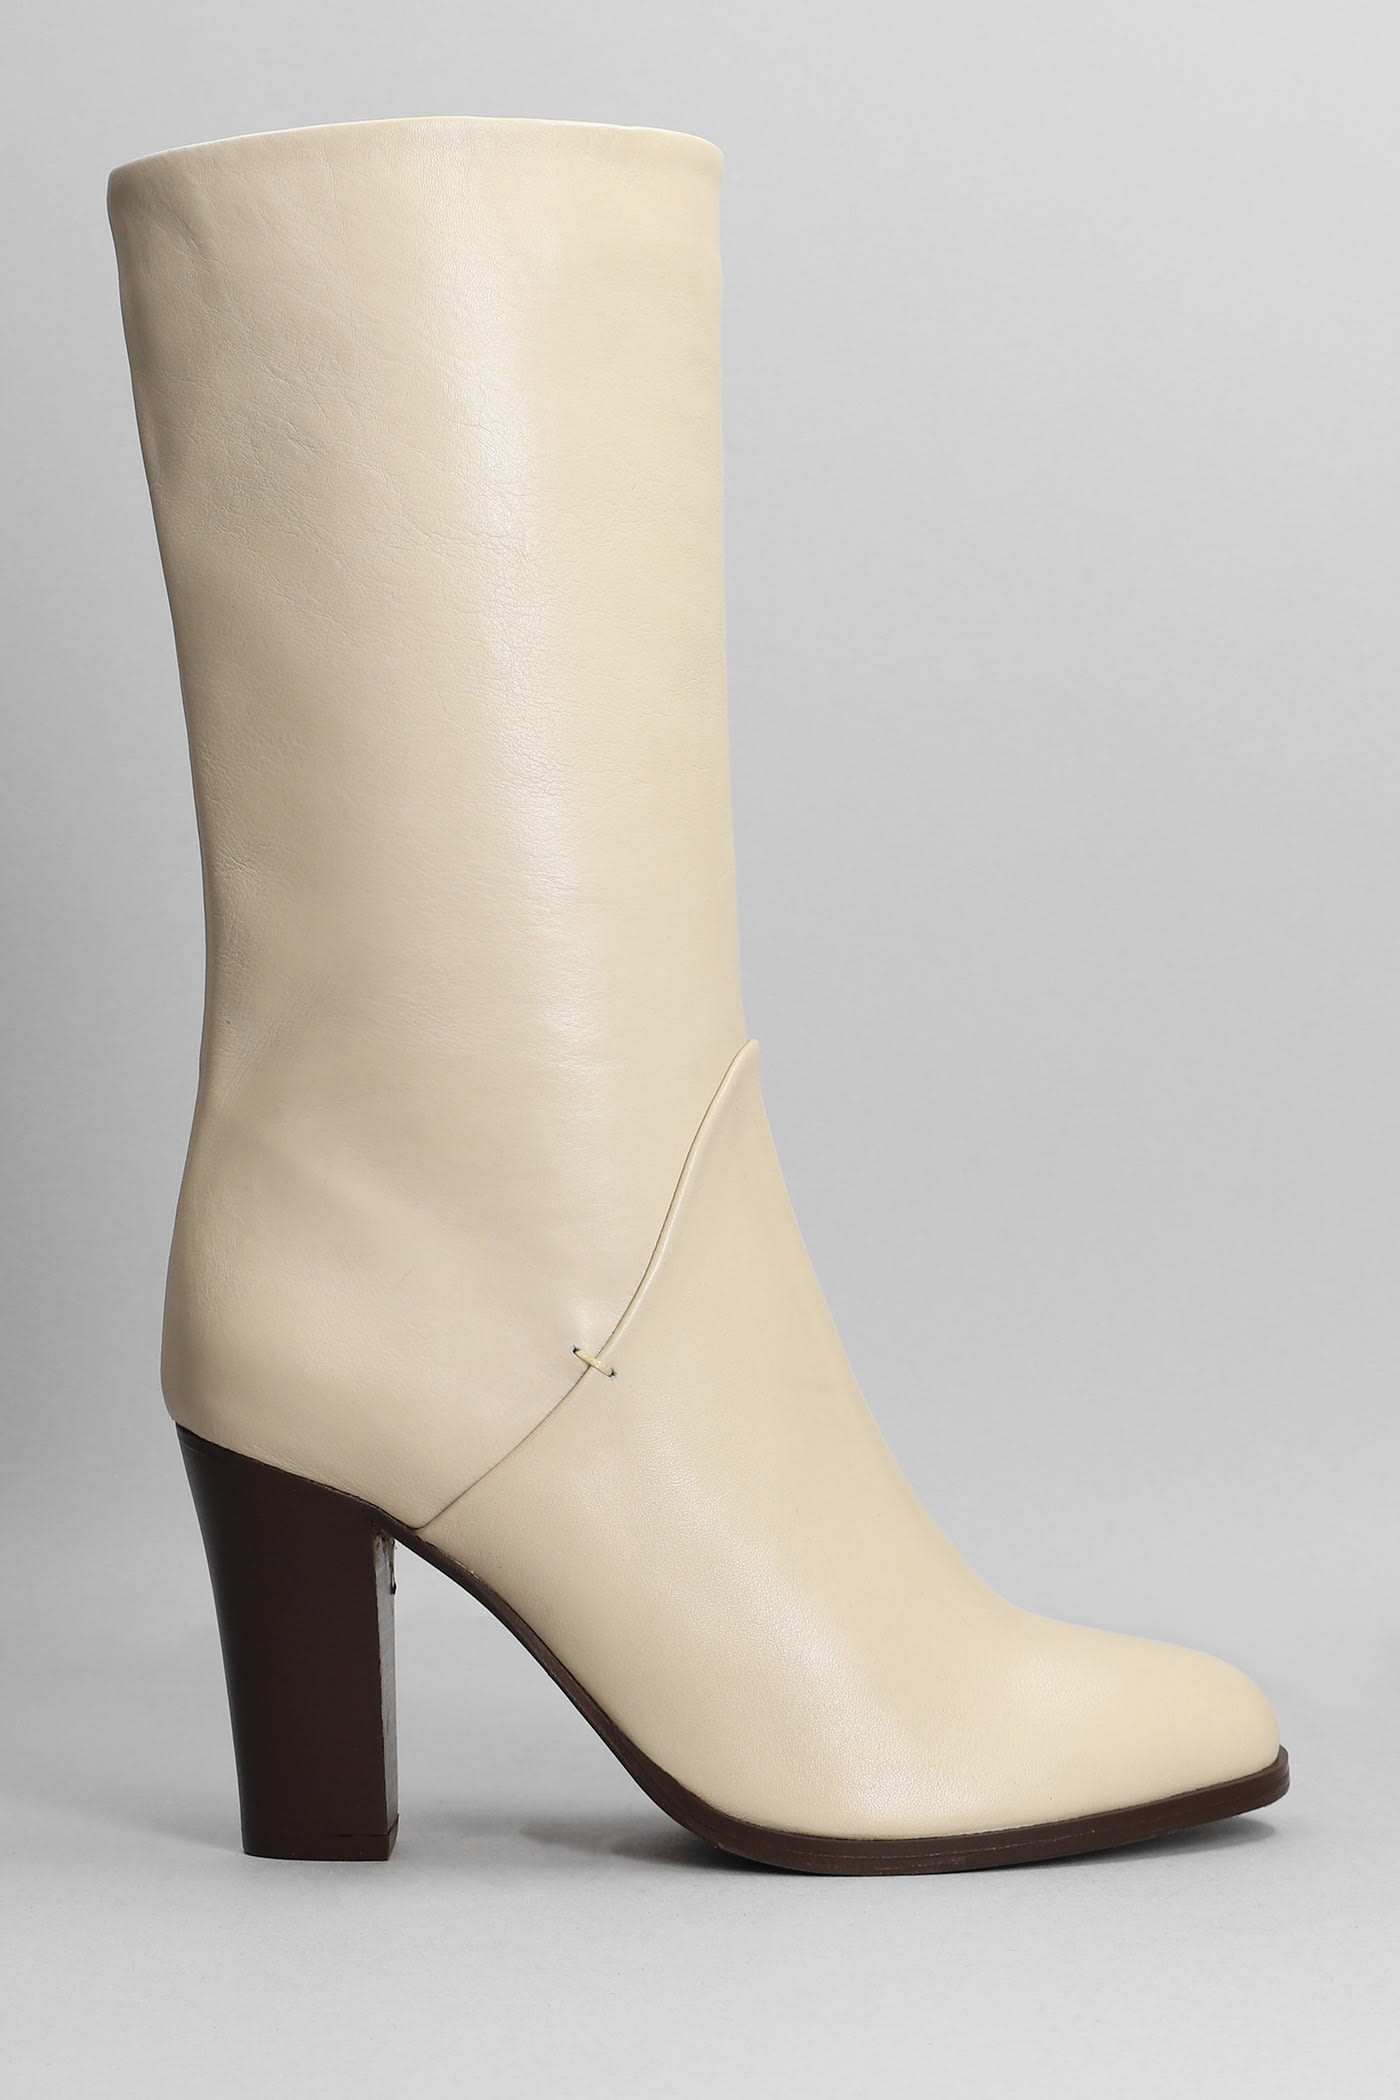 Julie Dee High Heels Ankle Boots In Beige Leather